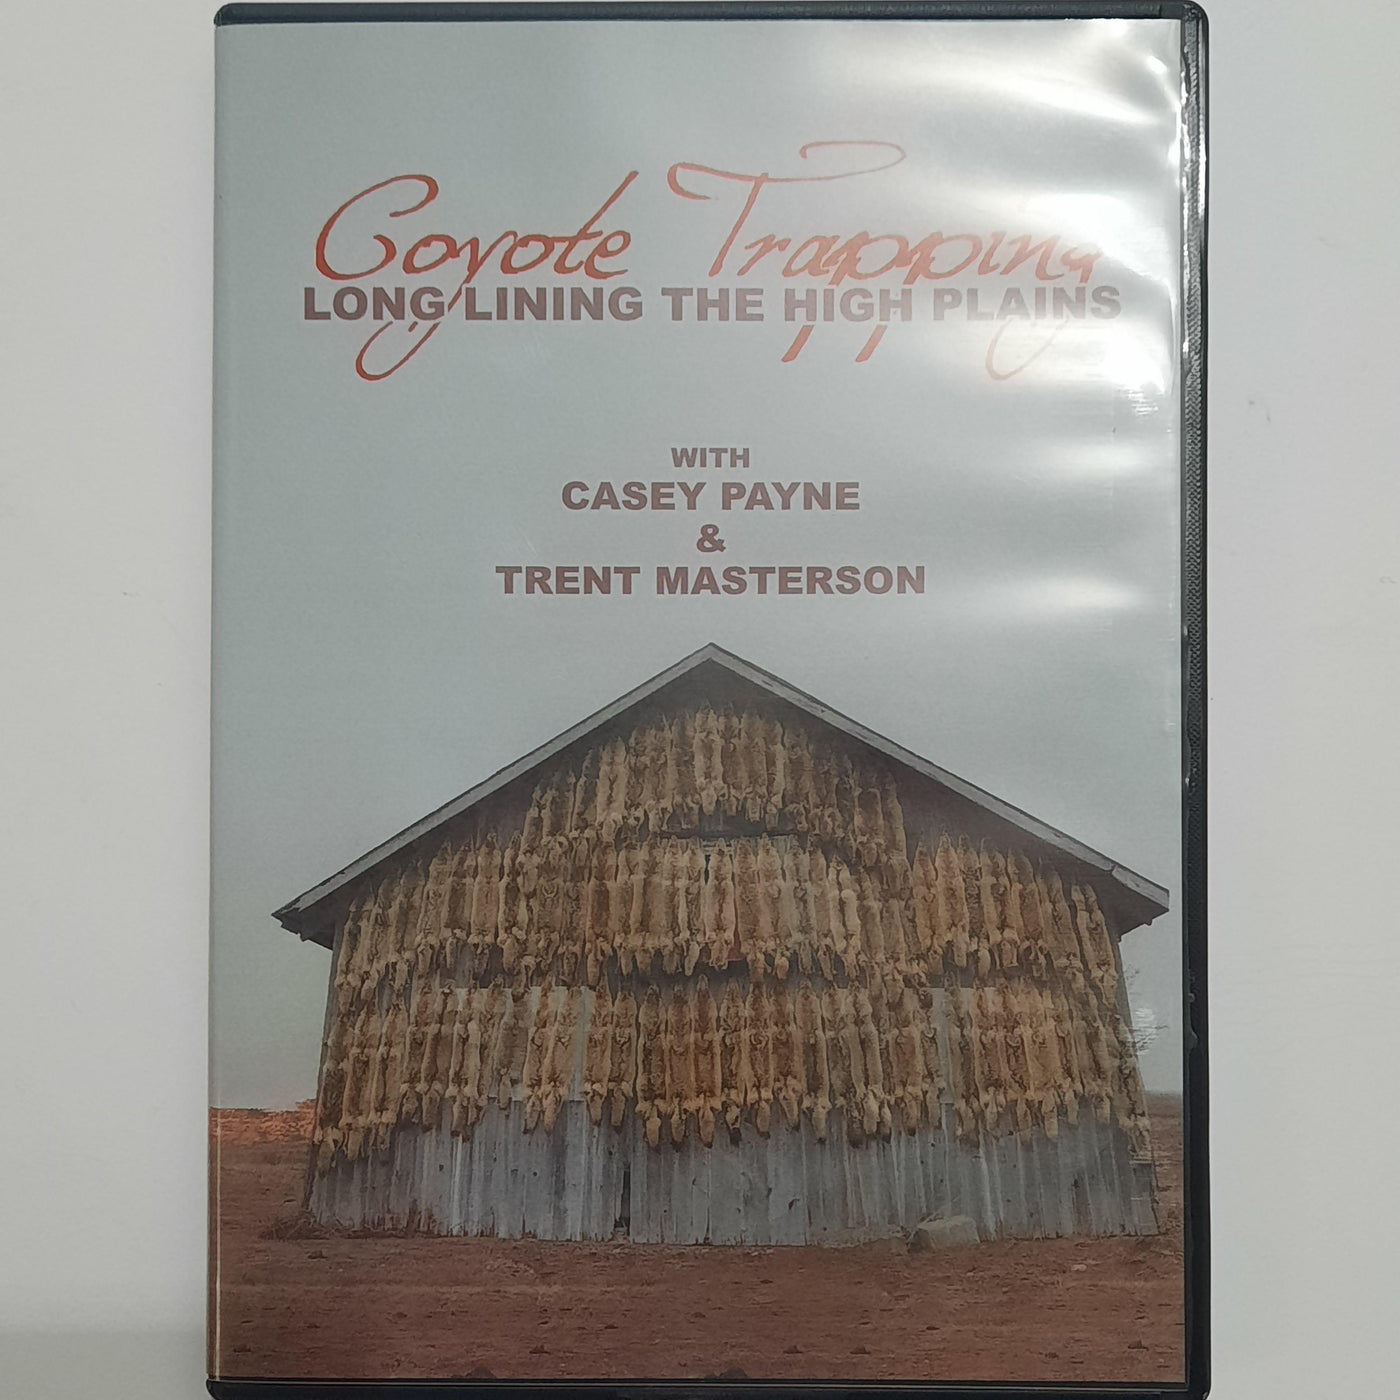 Longlining the High Plains - Coyote Trapping DVD - IronTrail Trapline Supply, LLC